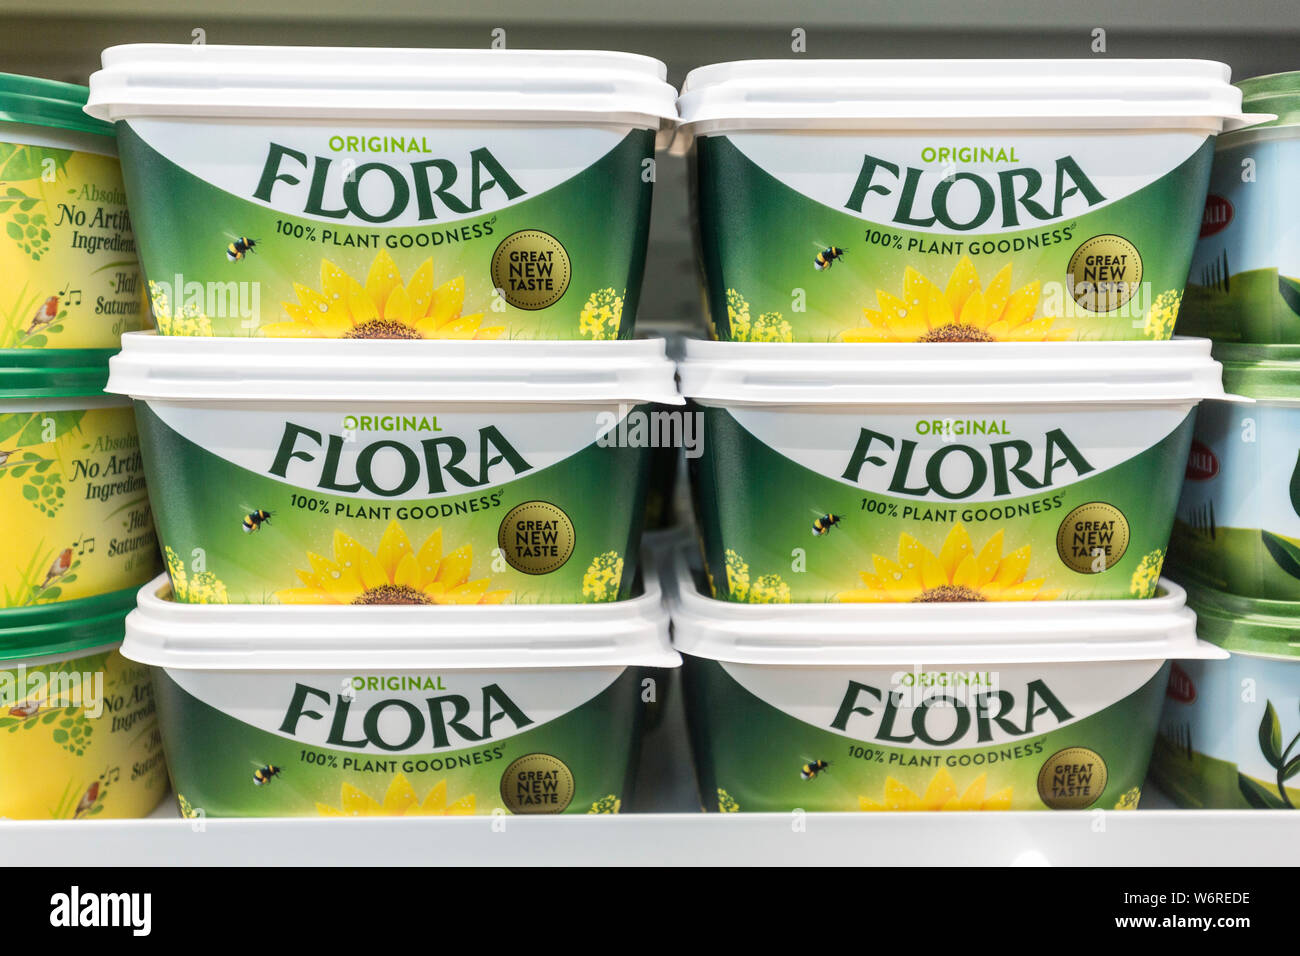 Flora margerine in a supermarket Stock Photo